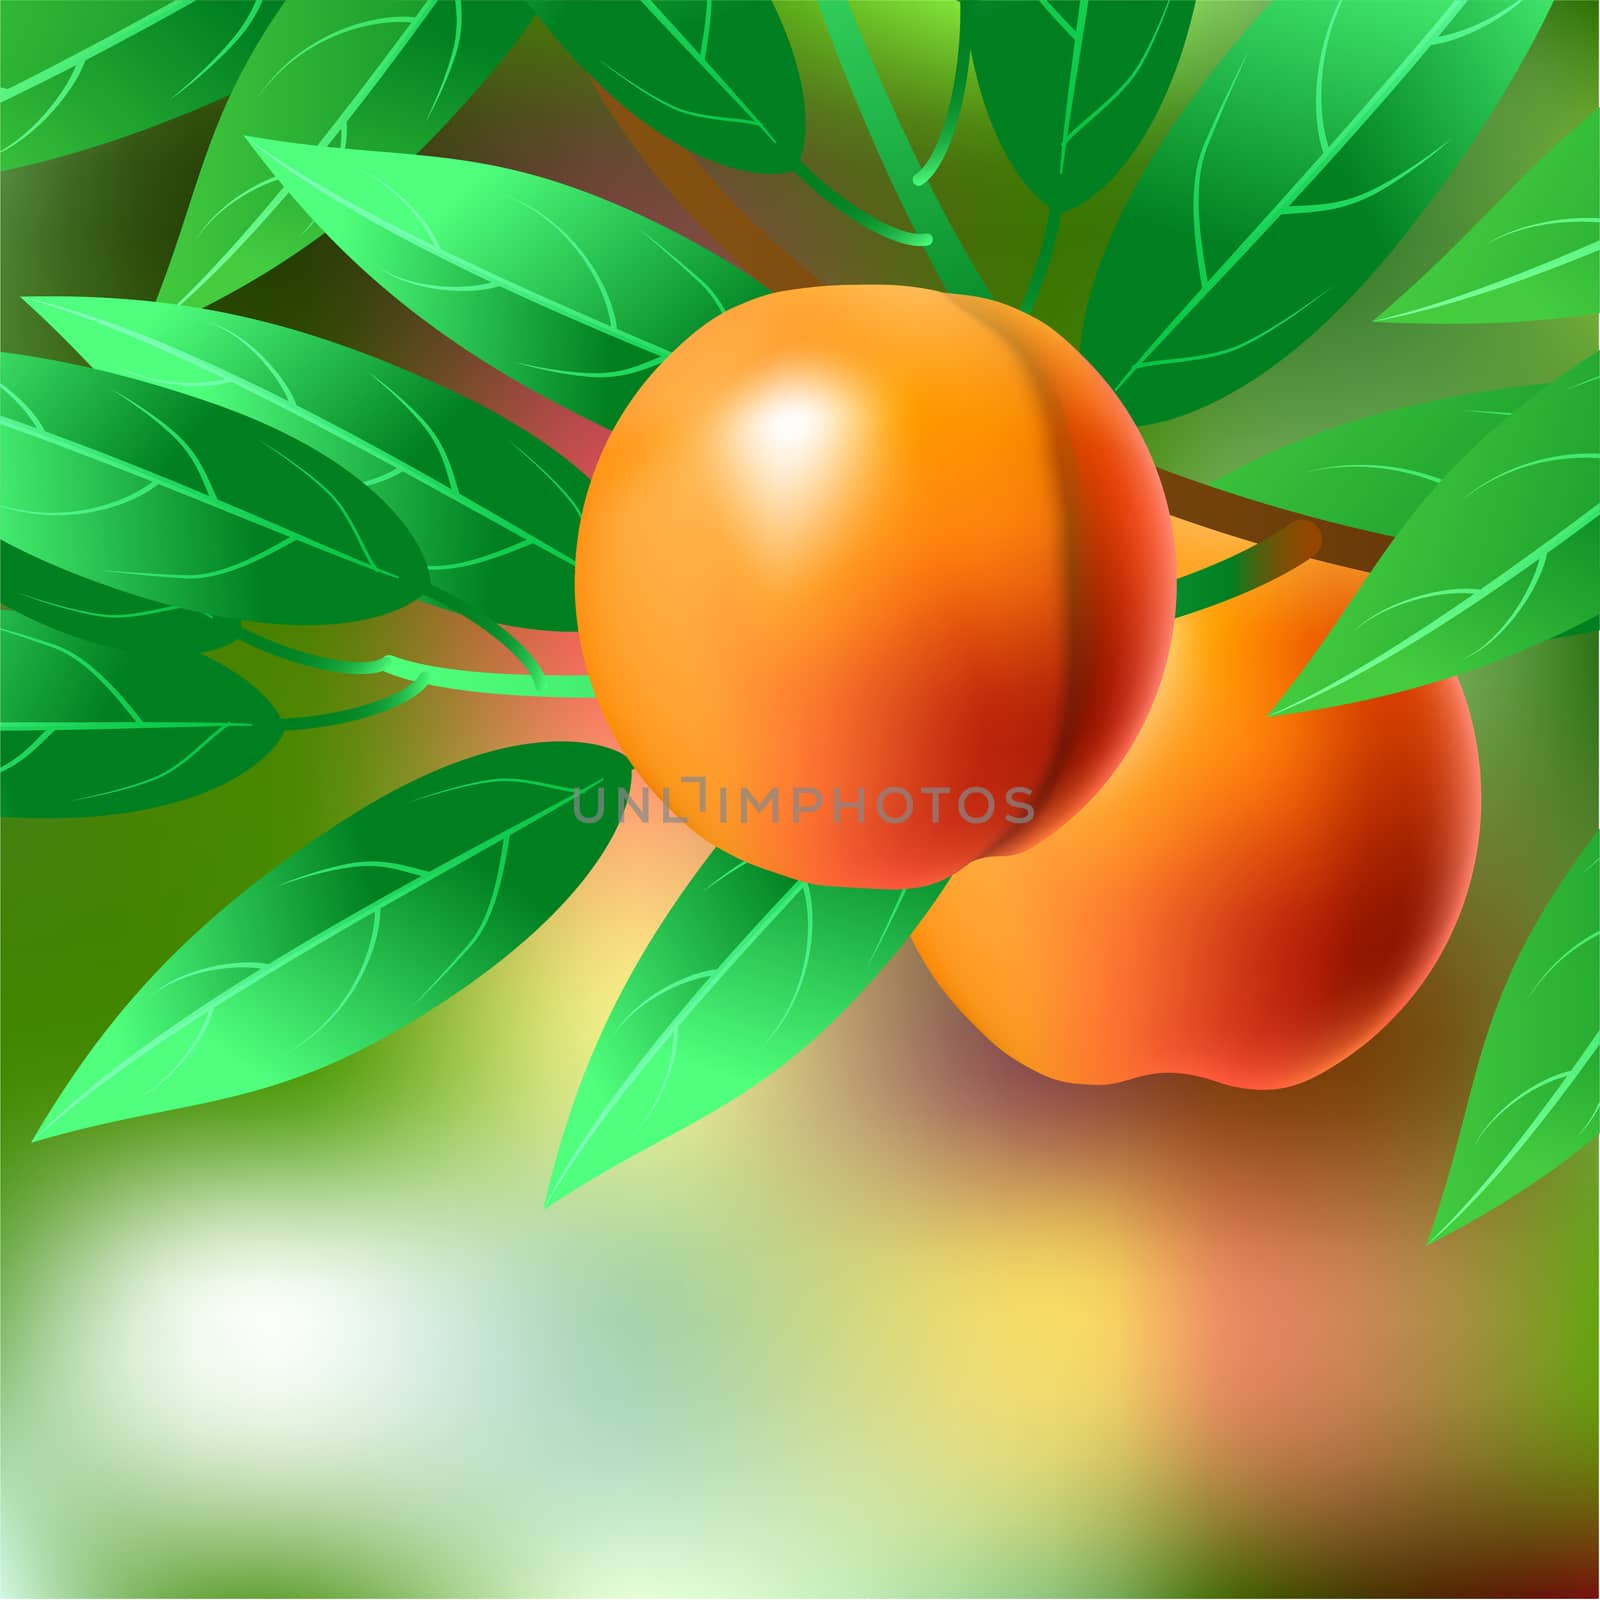 Orange, juicy, sweet peach on a branch for your design. by Adamchuk